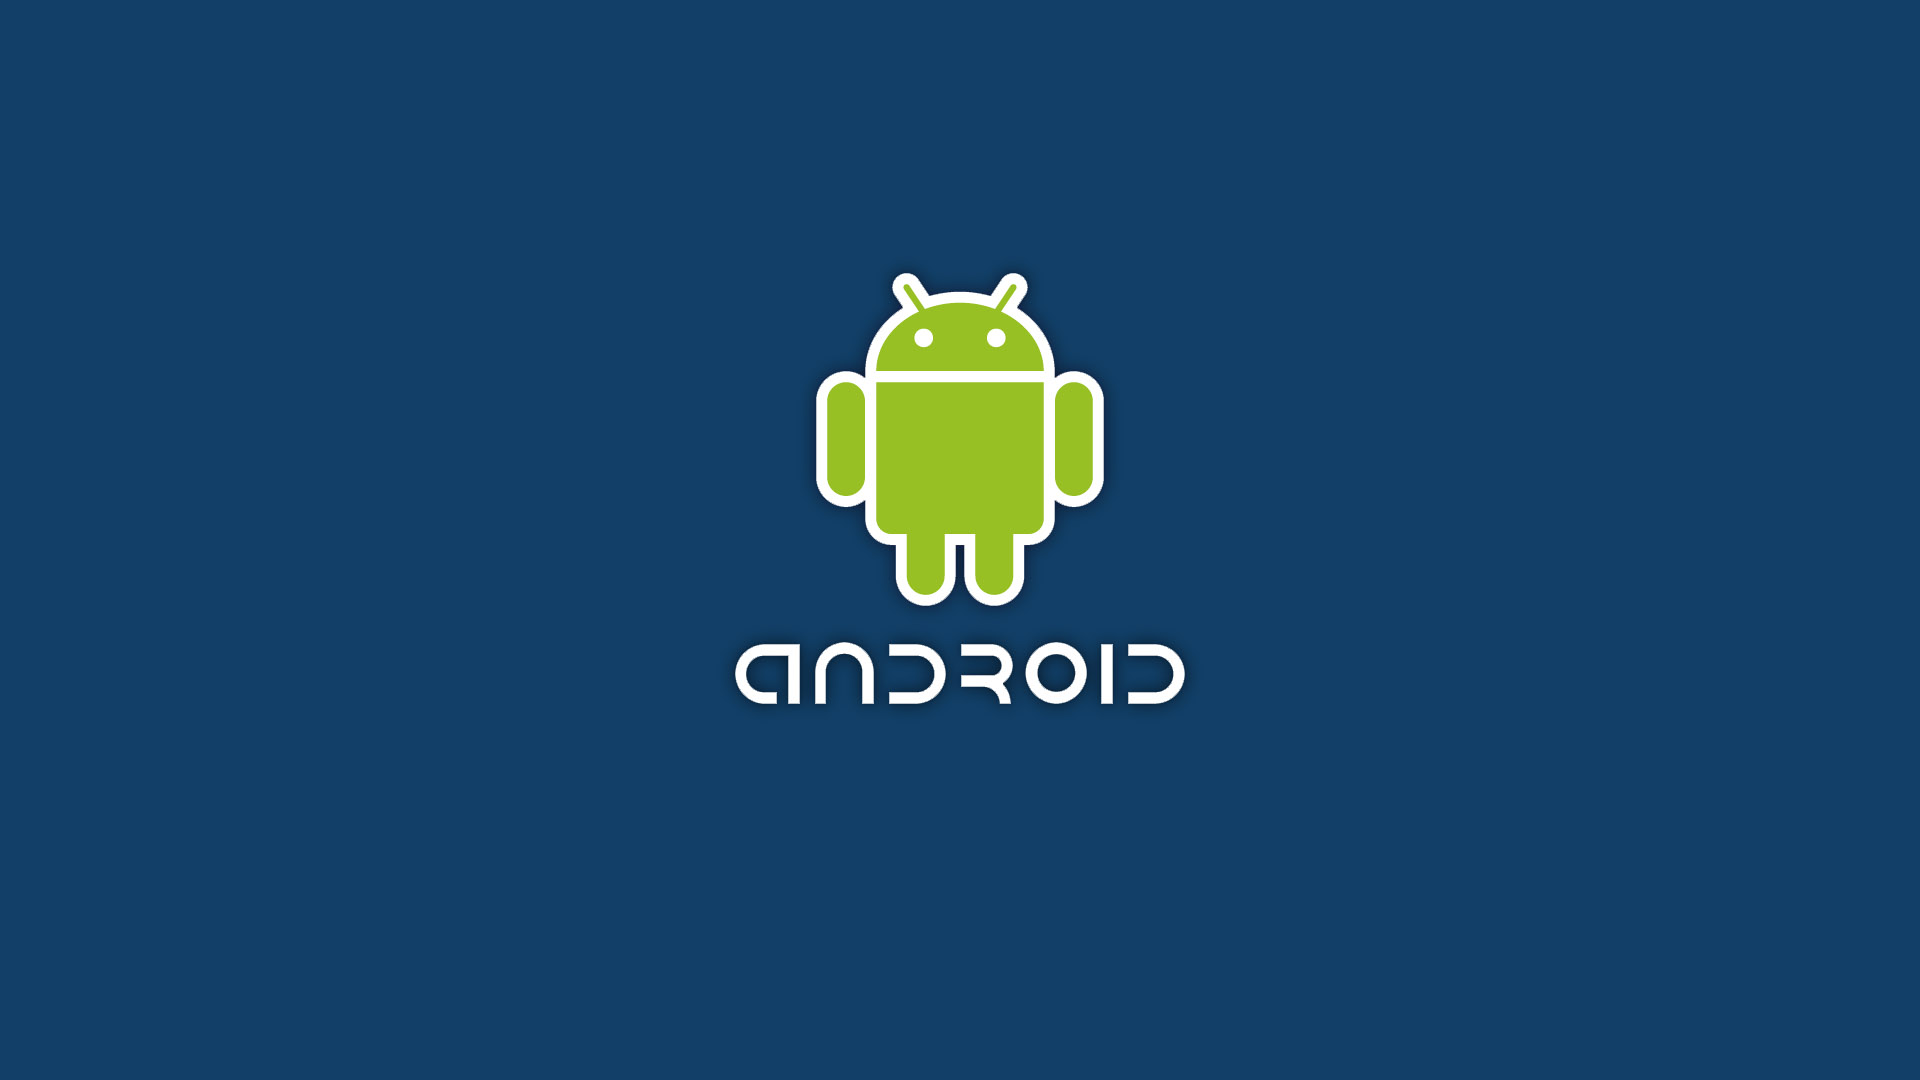 Android Mobile Logo 1920x1080 HD Image Computers